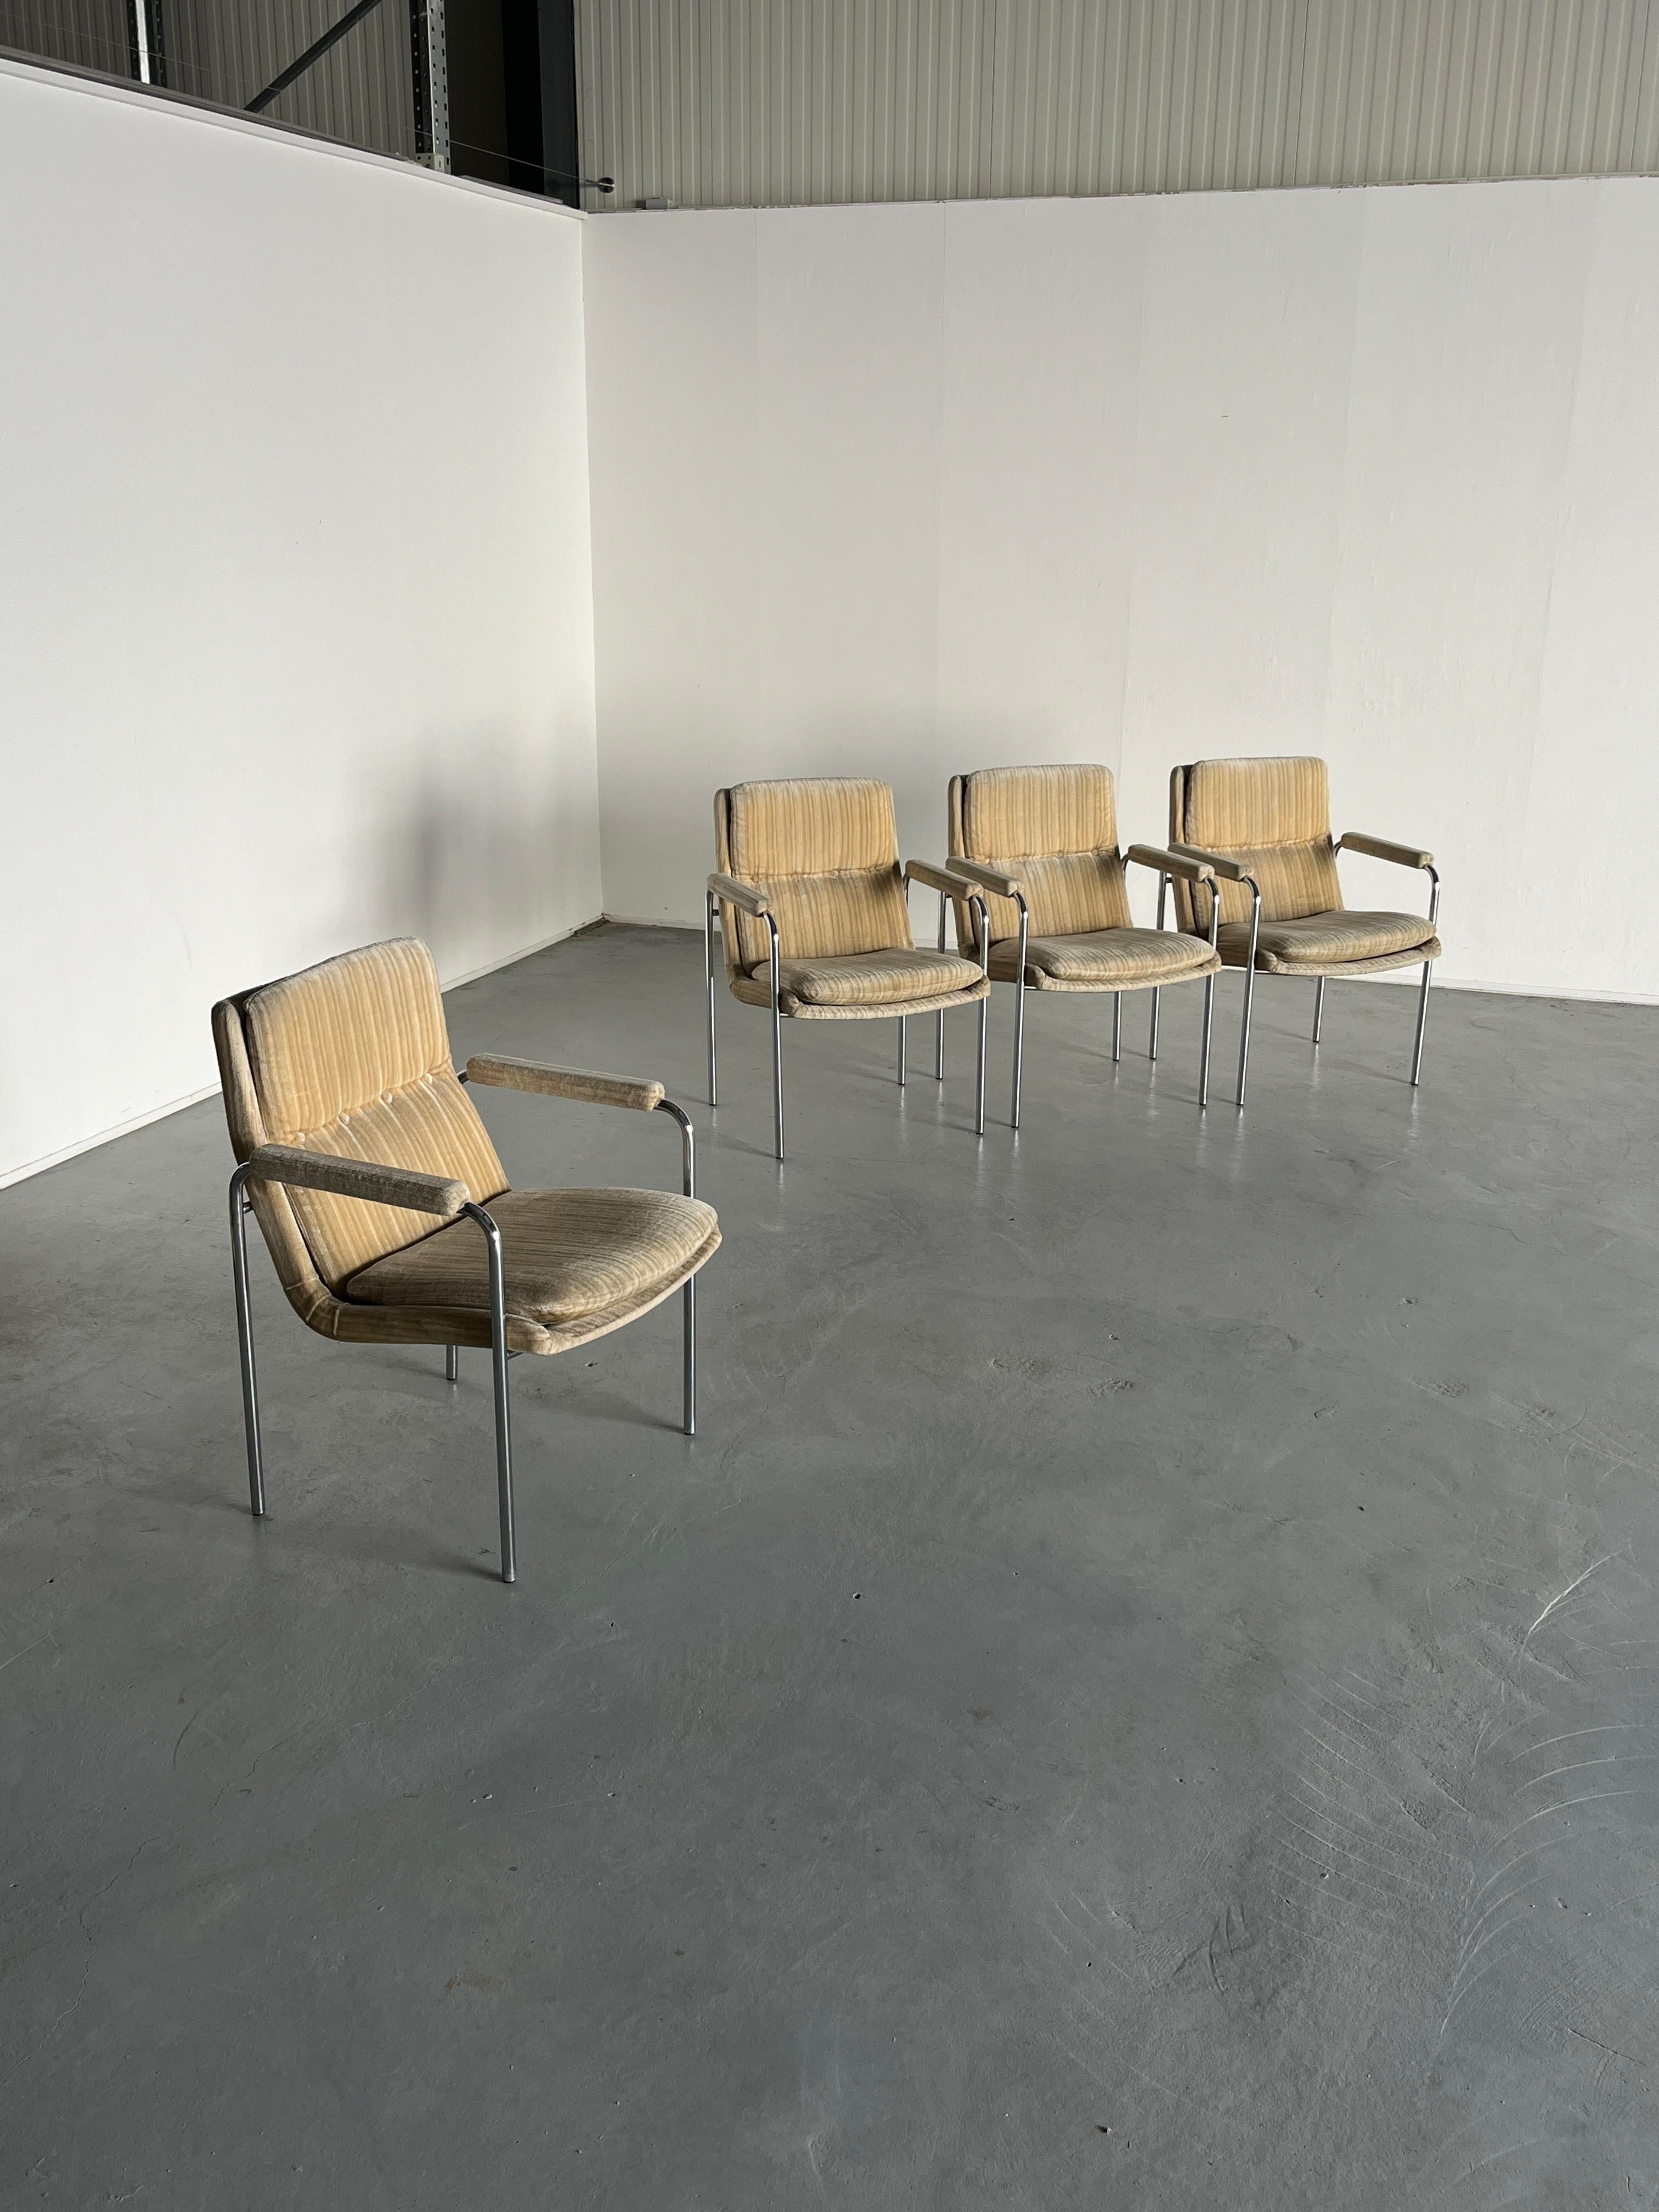 Four vintage comfortable Mid-Century modern armchairs with a chromed metal structure and beige upholstered seating.
Can be used as dining chairs, lounge chairs or accent chairs

Overall in good vintage condition with expected signs of age.